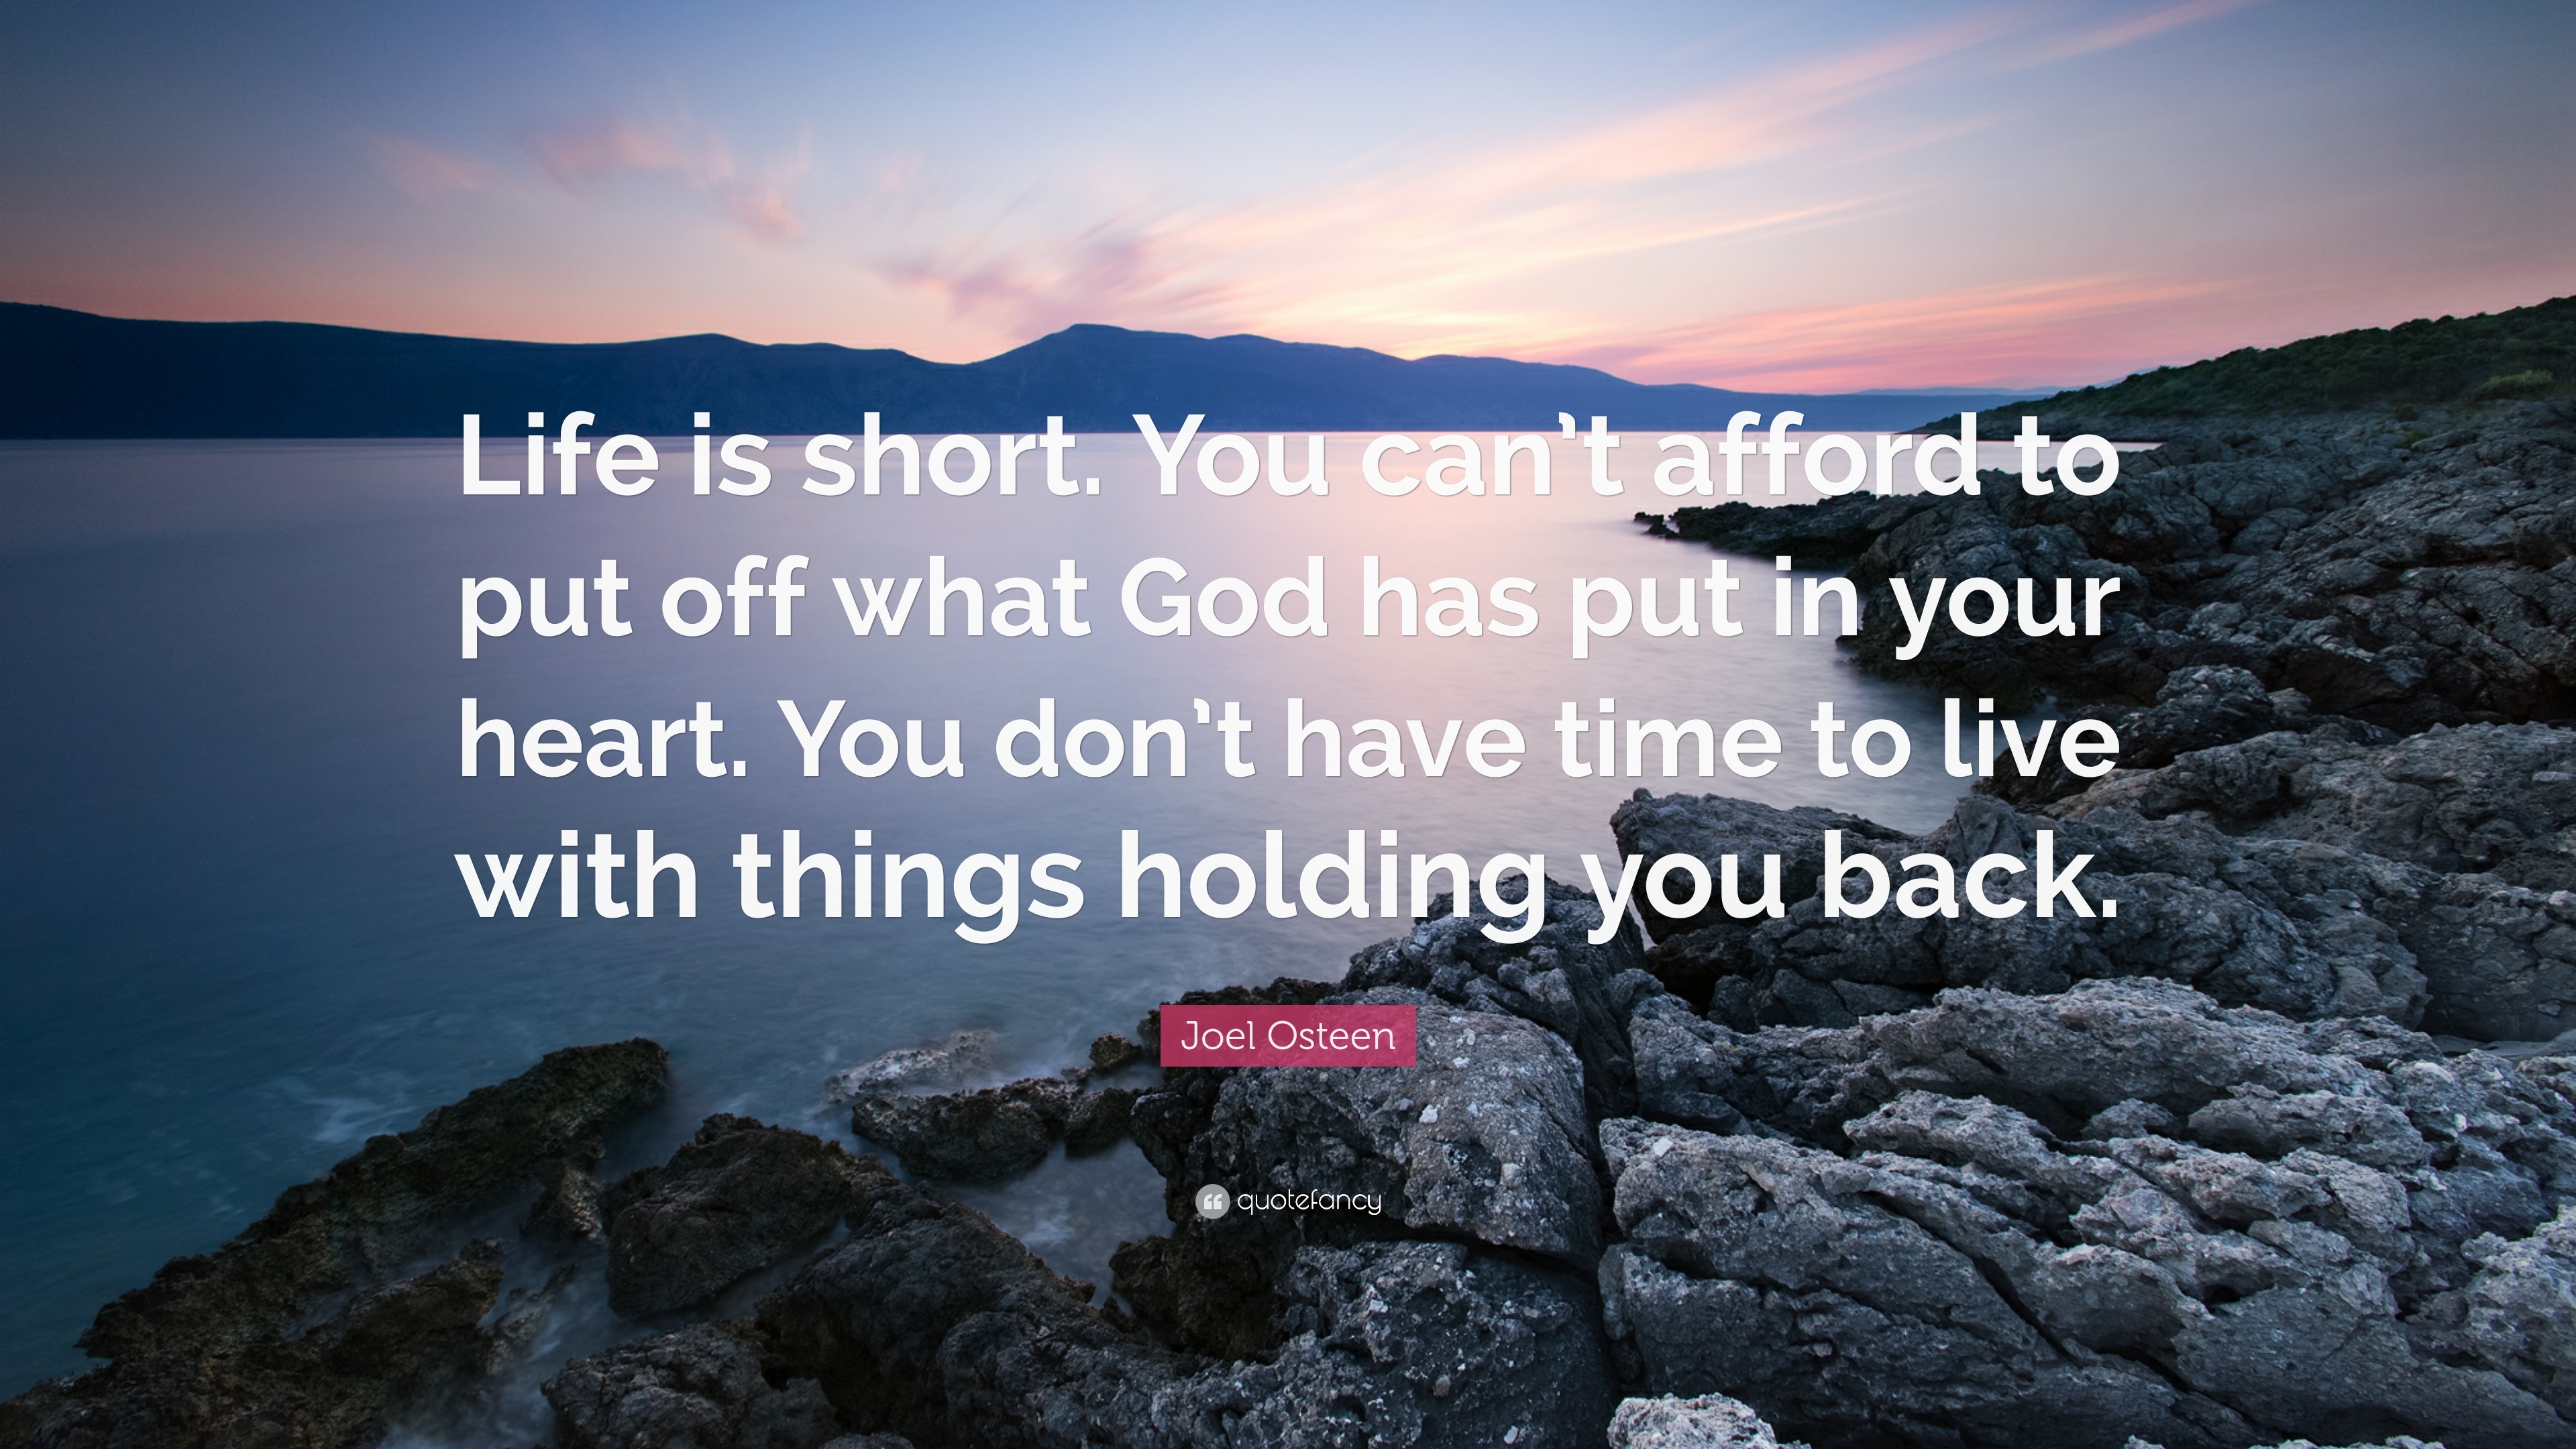 Life Is Short Quotes (40 wallpapers) - Quotefancy